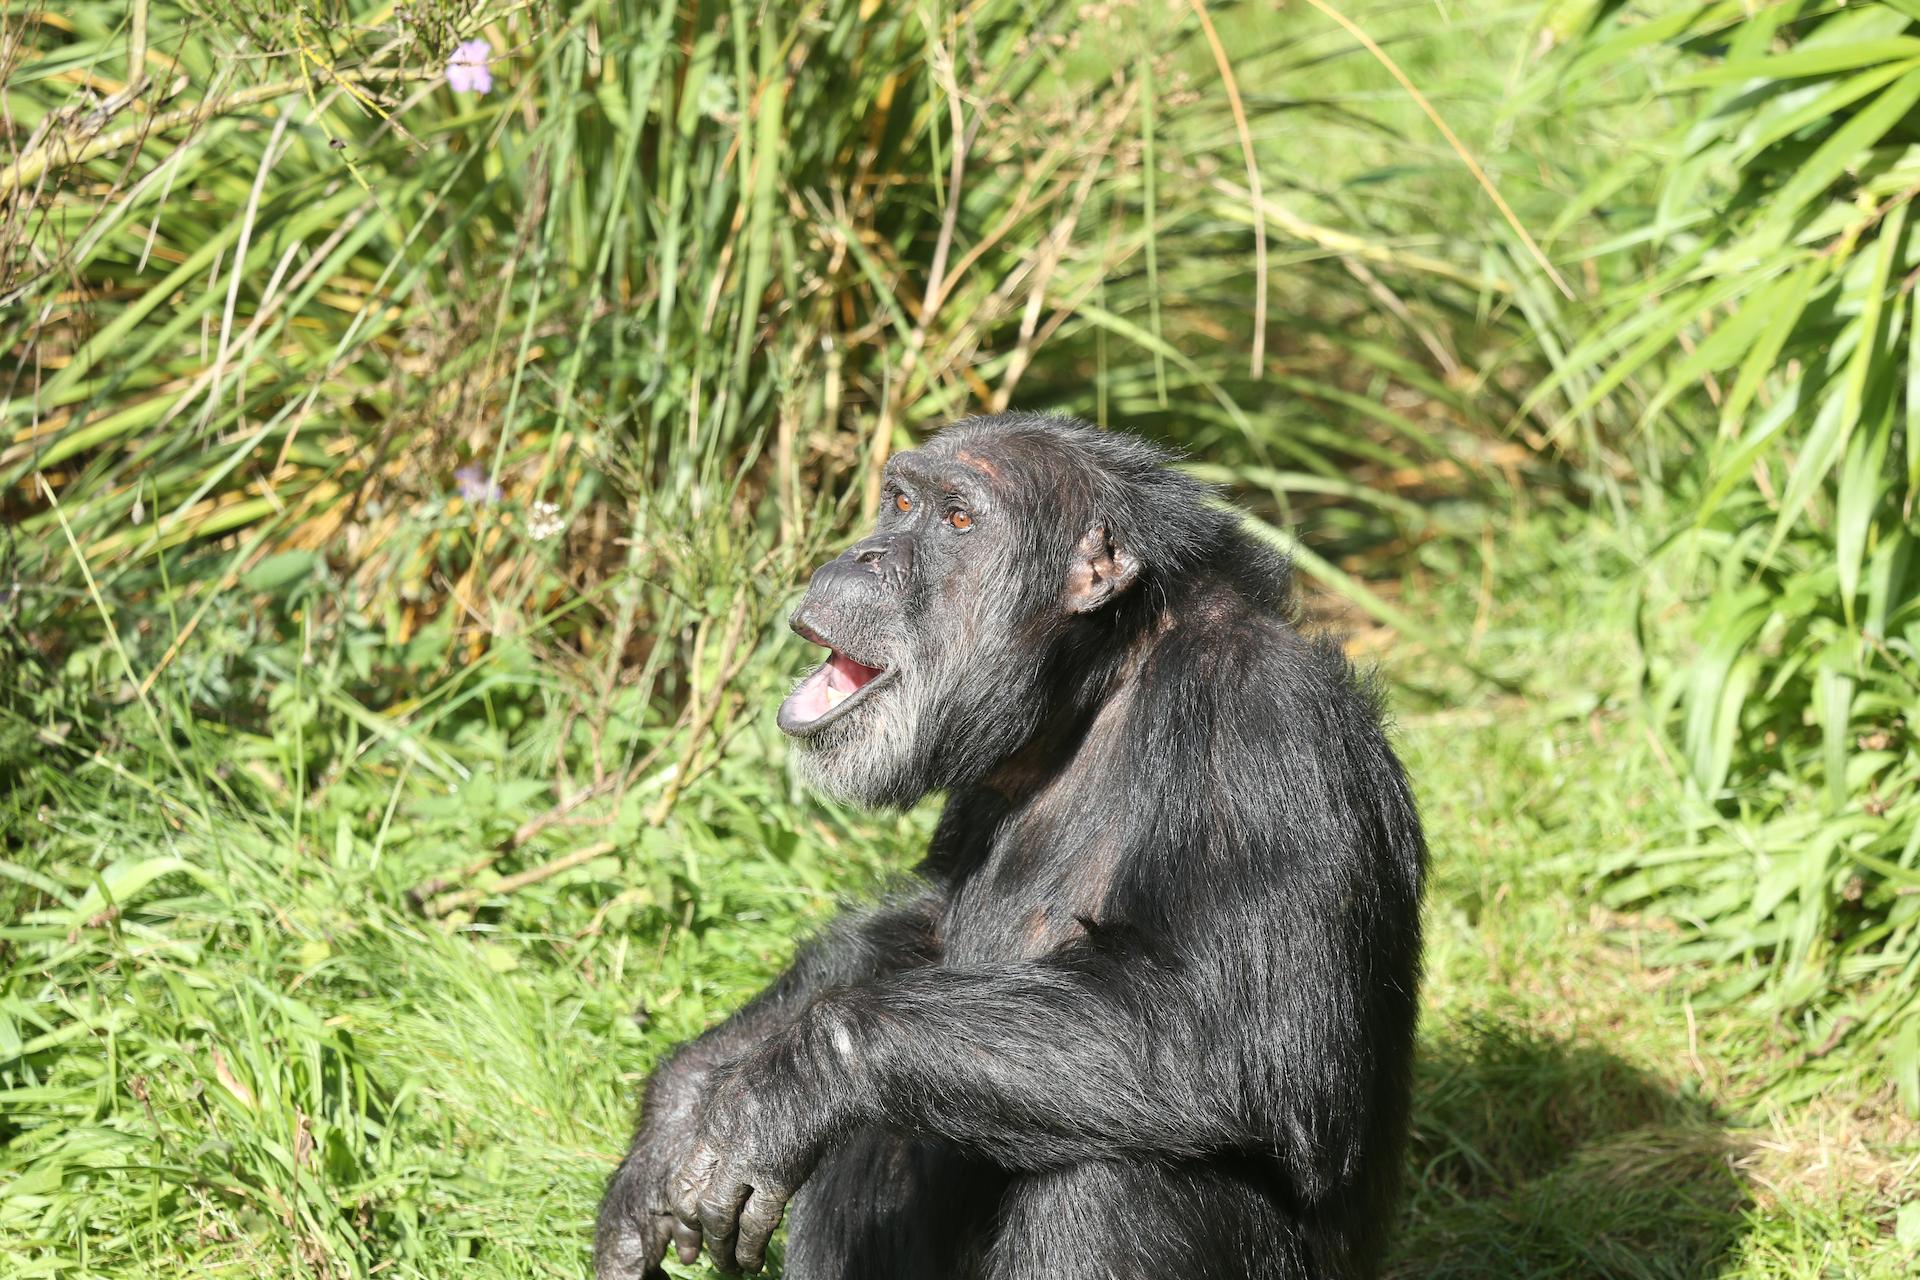 Chimpanzee David sitting in grass with mouth open

